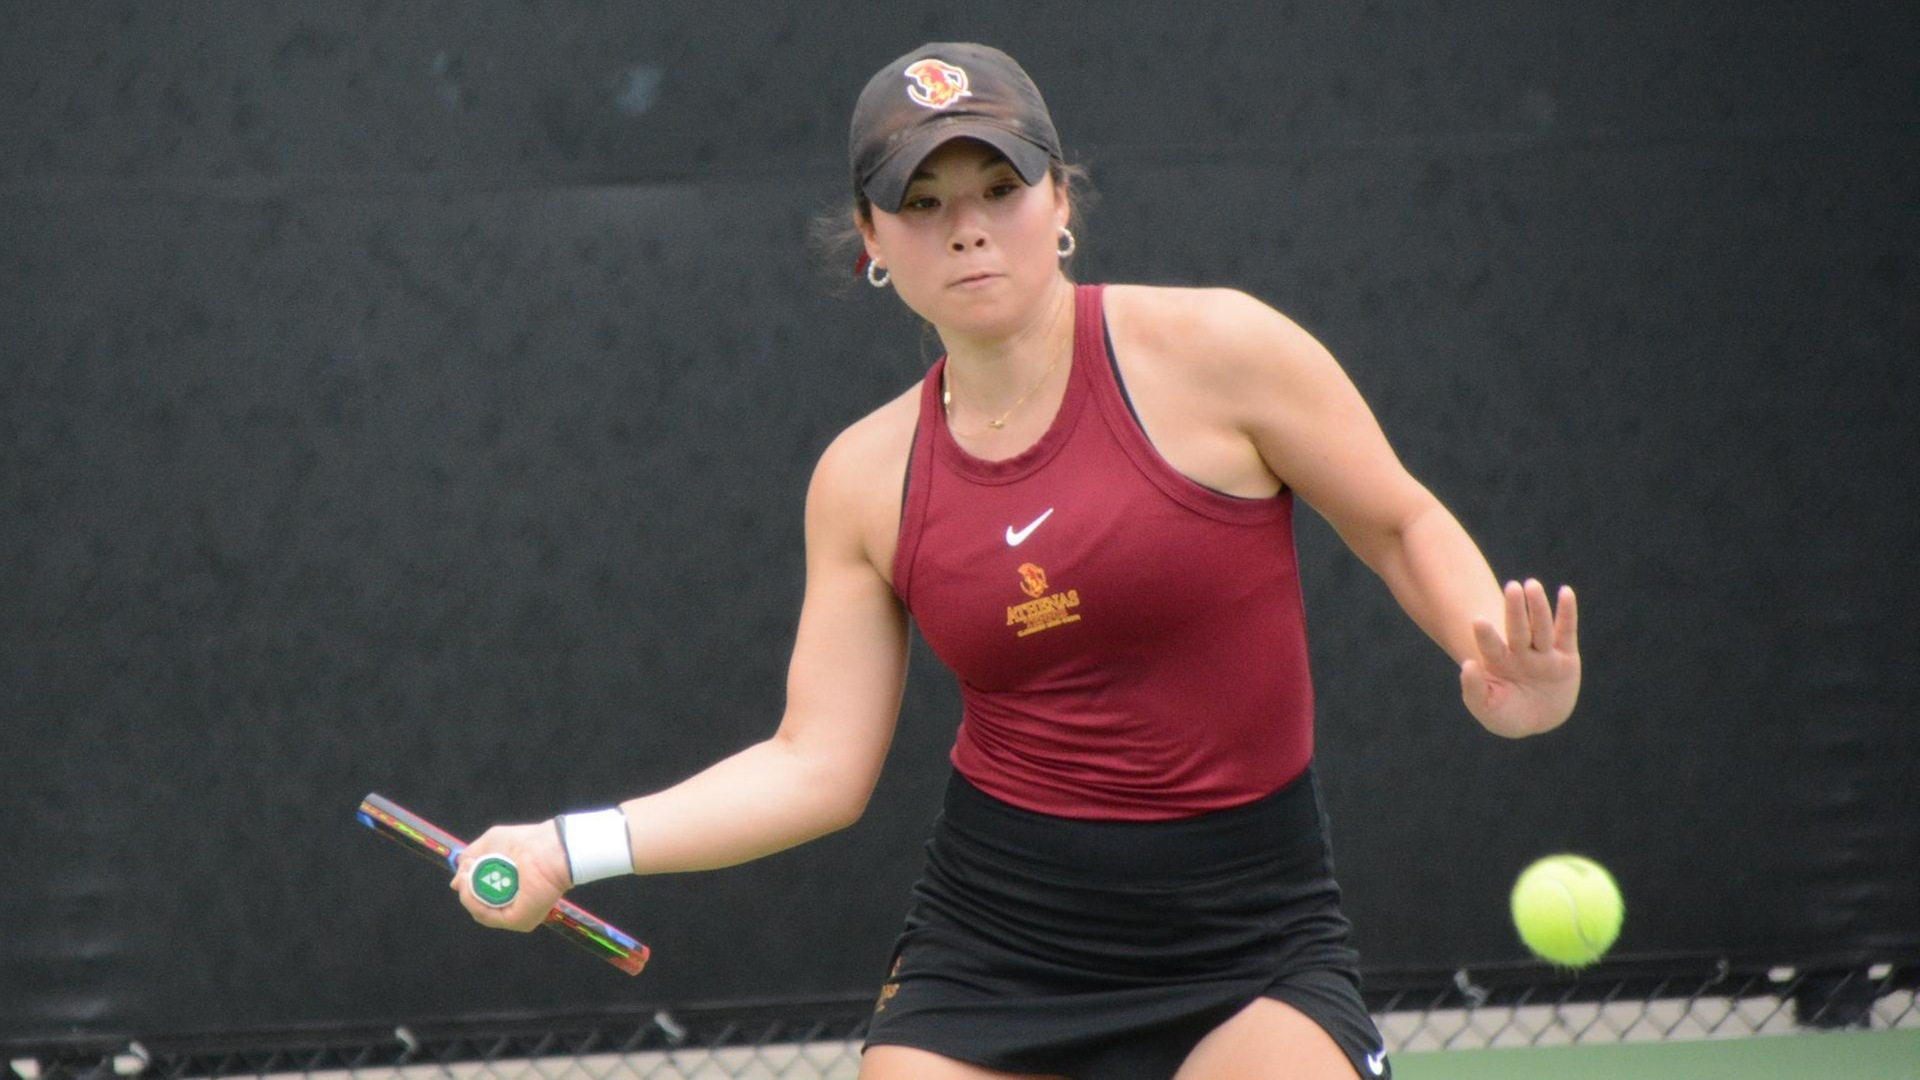 Sena Selby was unblemished, winning 8-0 in doubles and 6-0, 6-0 in singles